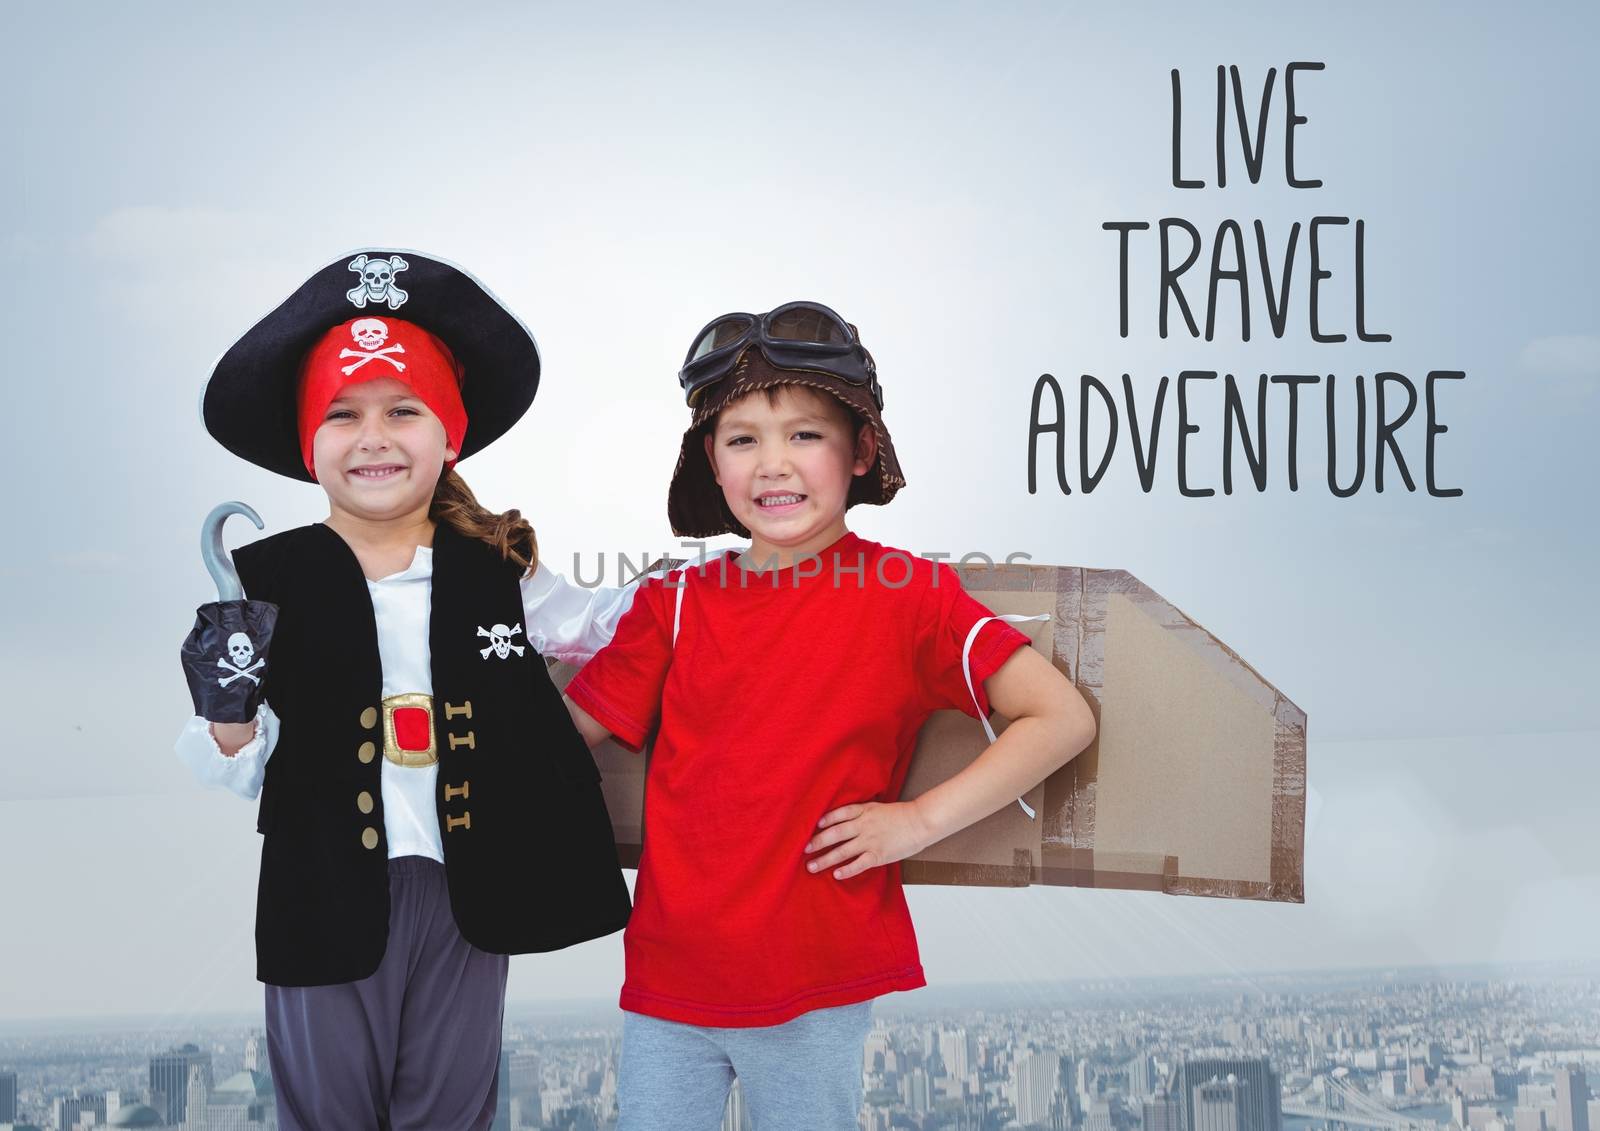 Digital composite of Live travel adventure text with Kids in pirate and pilot costumes over city